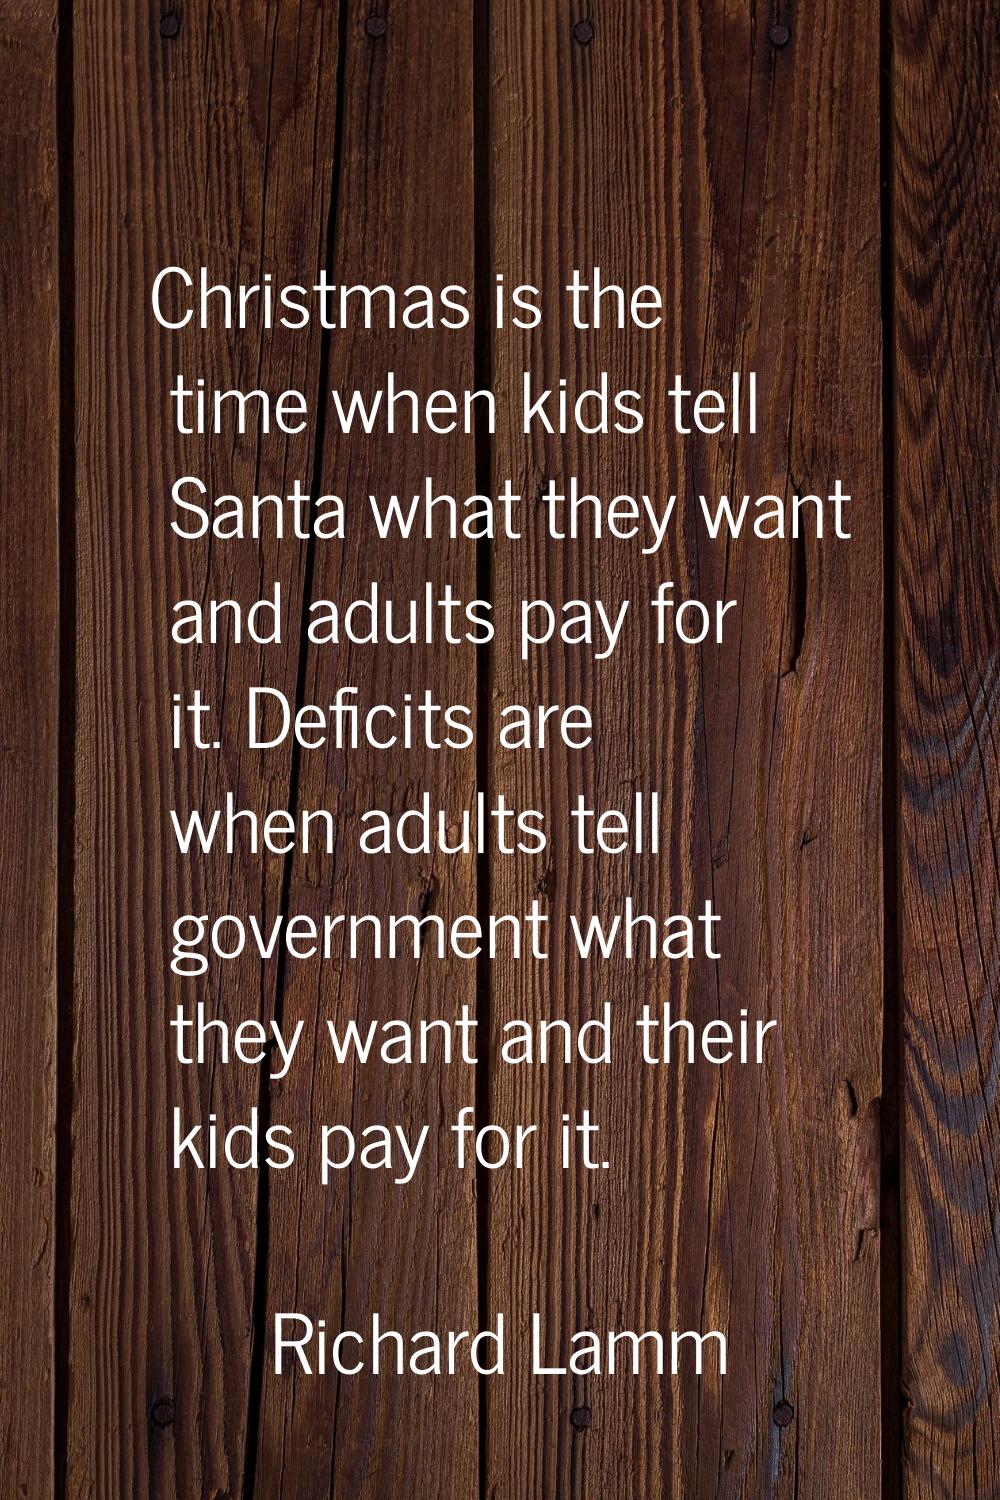 Christmas is the time when kids tell Santa what they want and adults pay for it. Deficits are when 